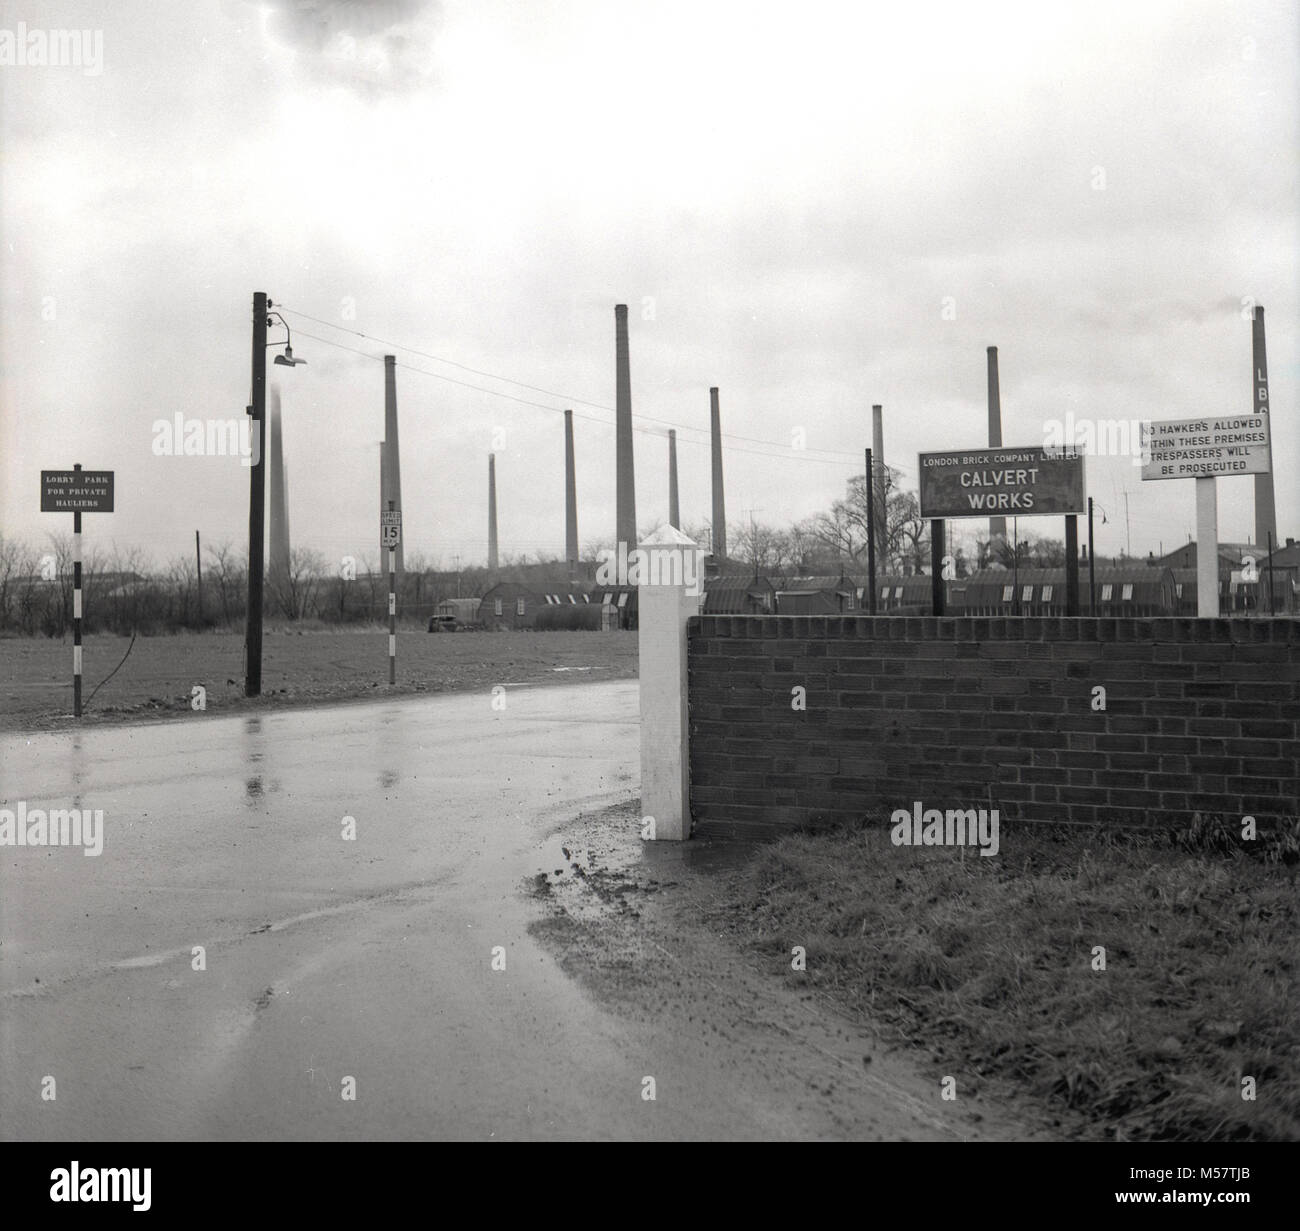 Mid-1950s, historical picture showing the entrance to the Calverts Works, the Buckinghamshire site of the the brickmakers, the London Brick Company. Founded in 1900 by Arthur Werner Ltter, it survived for nearly 100 years before closing in 1991. The large chimneys and numerous works nissan huts can be seen in the picture. Stock Photo